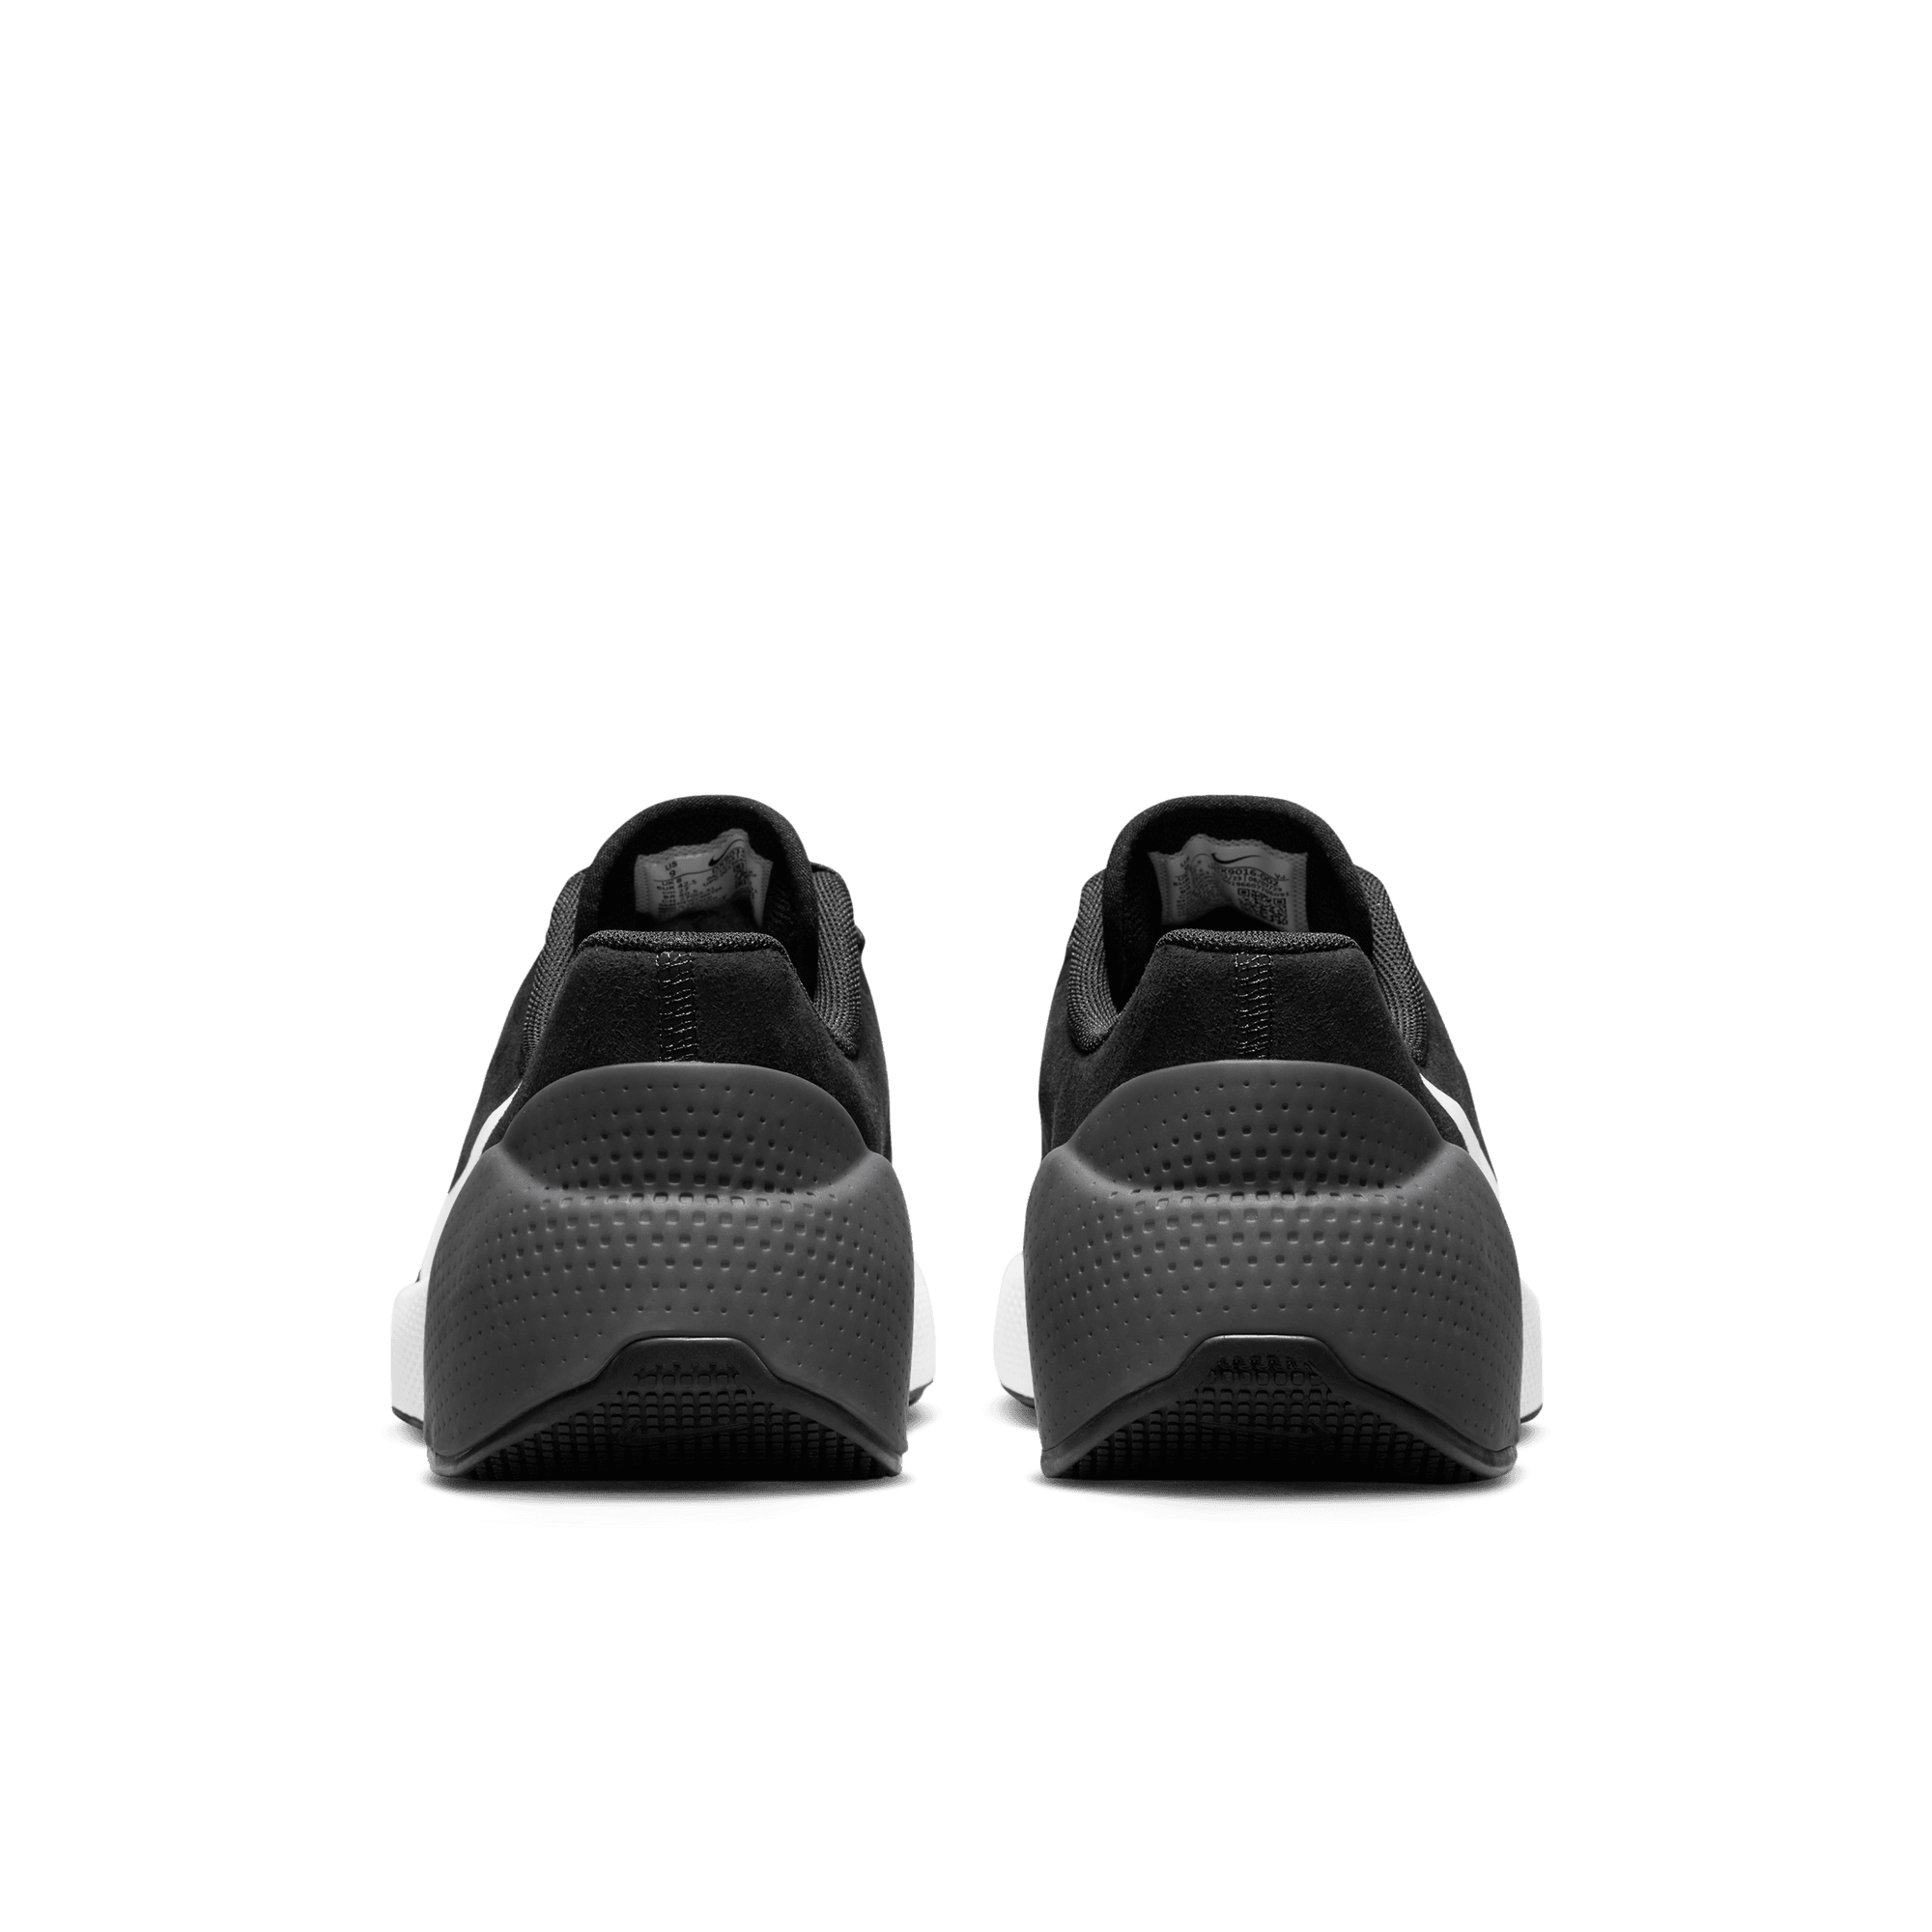 NIKE AIR ZOOM TR 1 MEN'S WORKOUT SHOES BLACK/WHITE-ANTHRACITE – Park Access